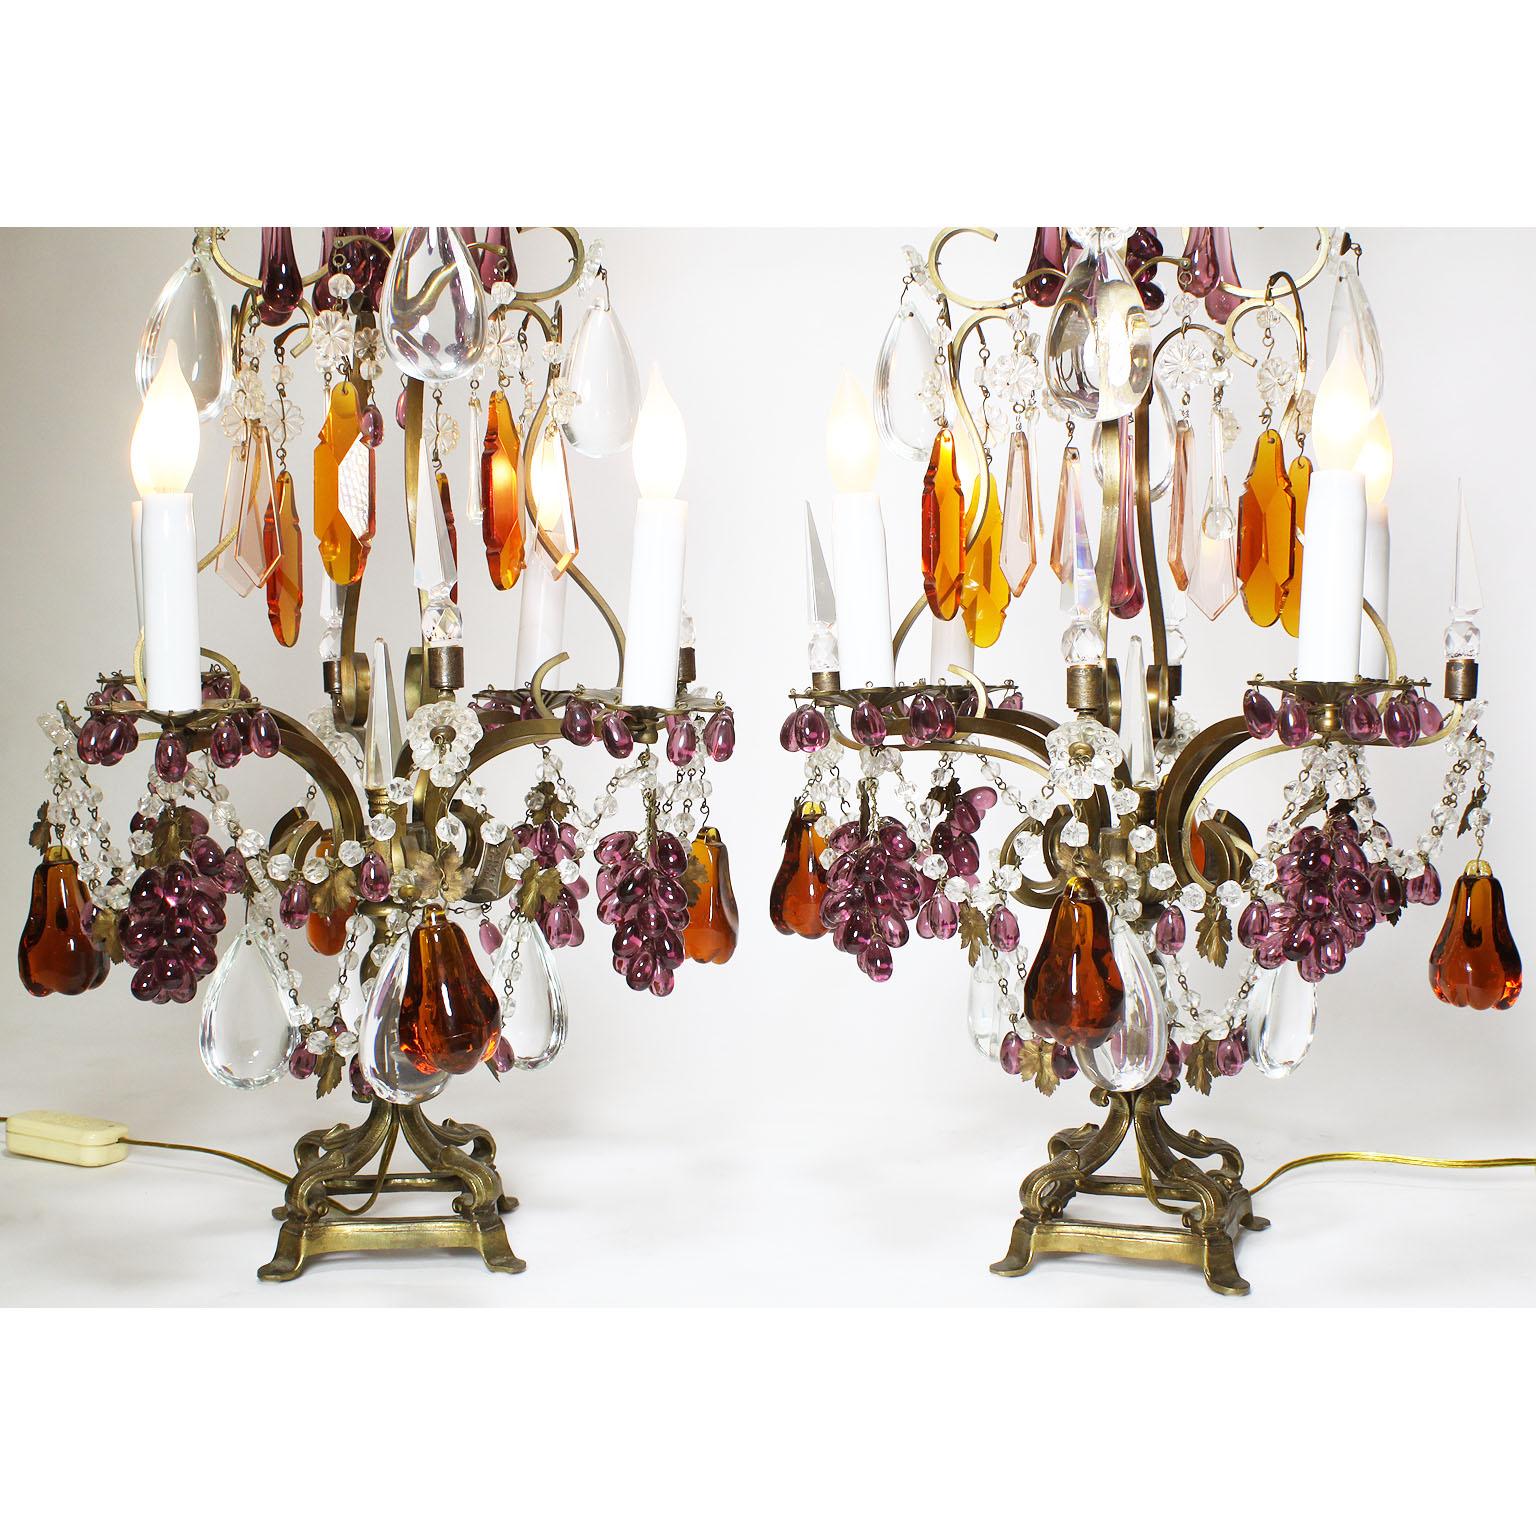 A pair of Italian 19th-20th century Florentine cut-clear and color glass four-lights girandoles table lamps. The scrolled bronze frame with four scrolled candle-arms, surmounted with cut-glass tear-drops, floral design cut-glass petals, amethyst